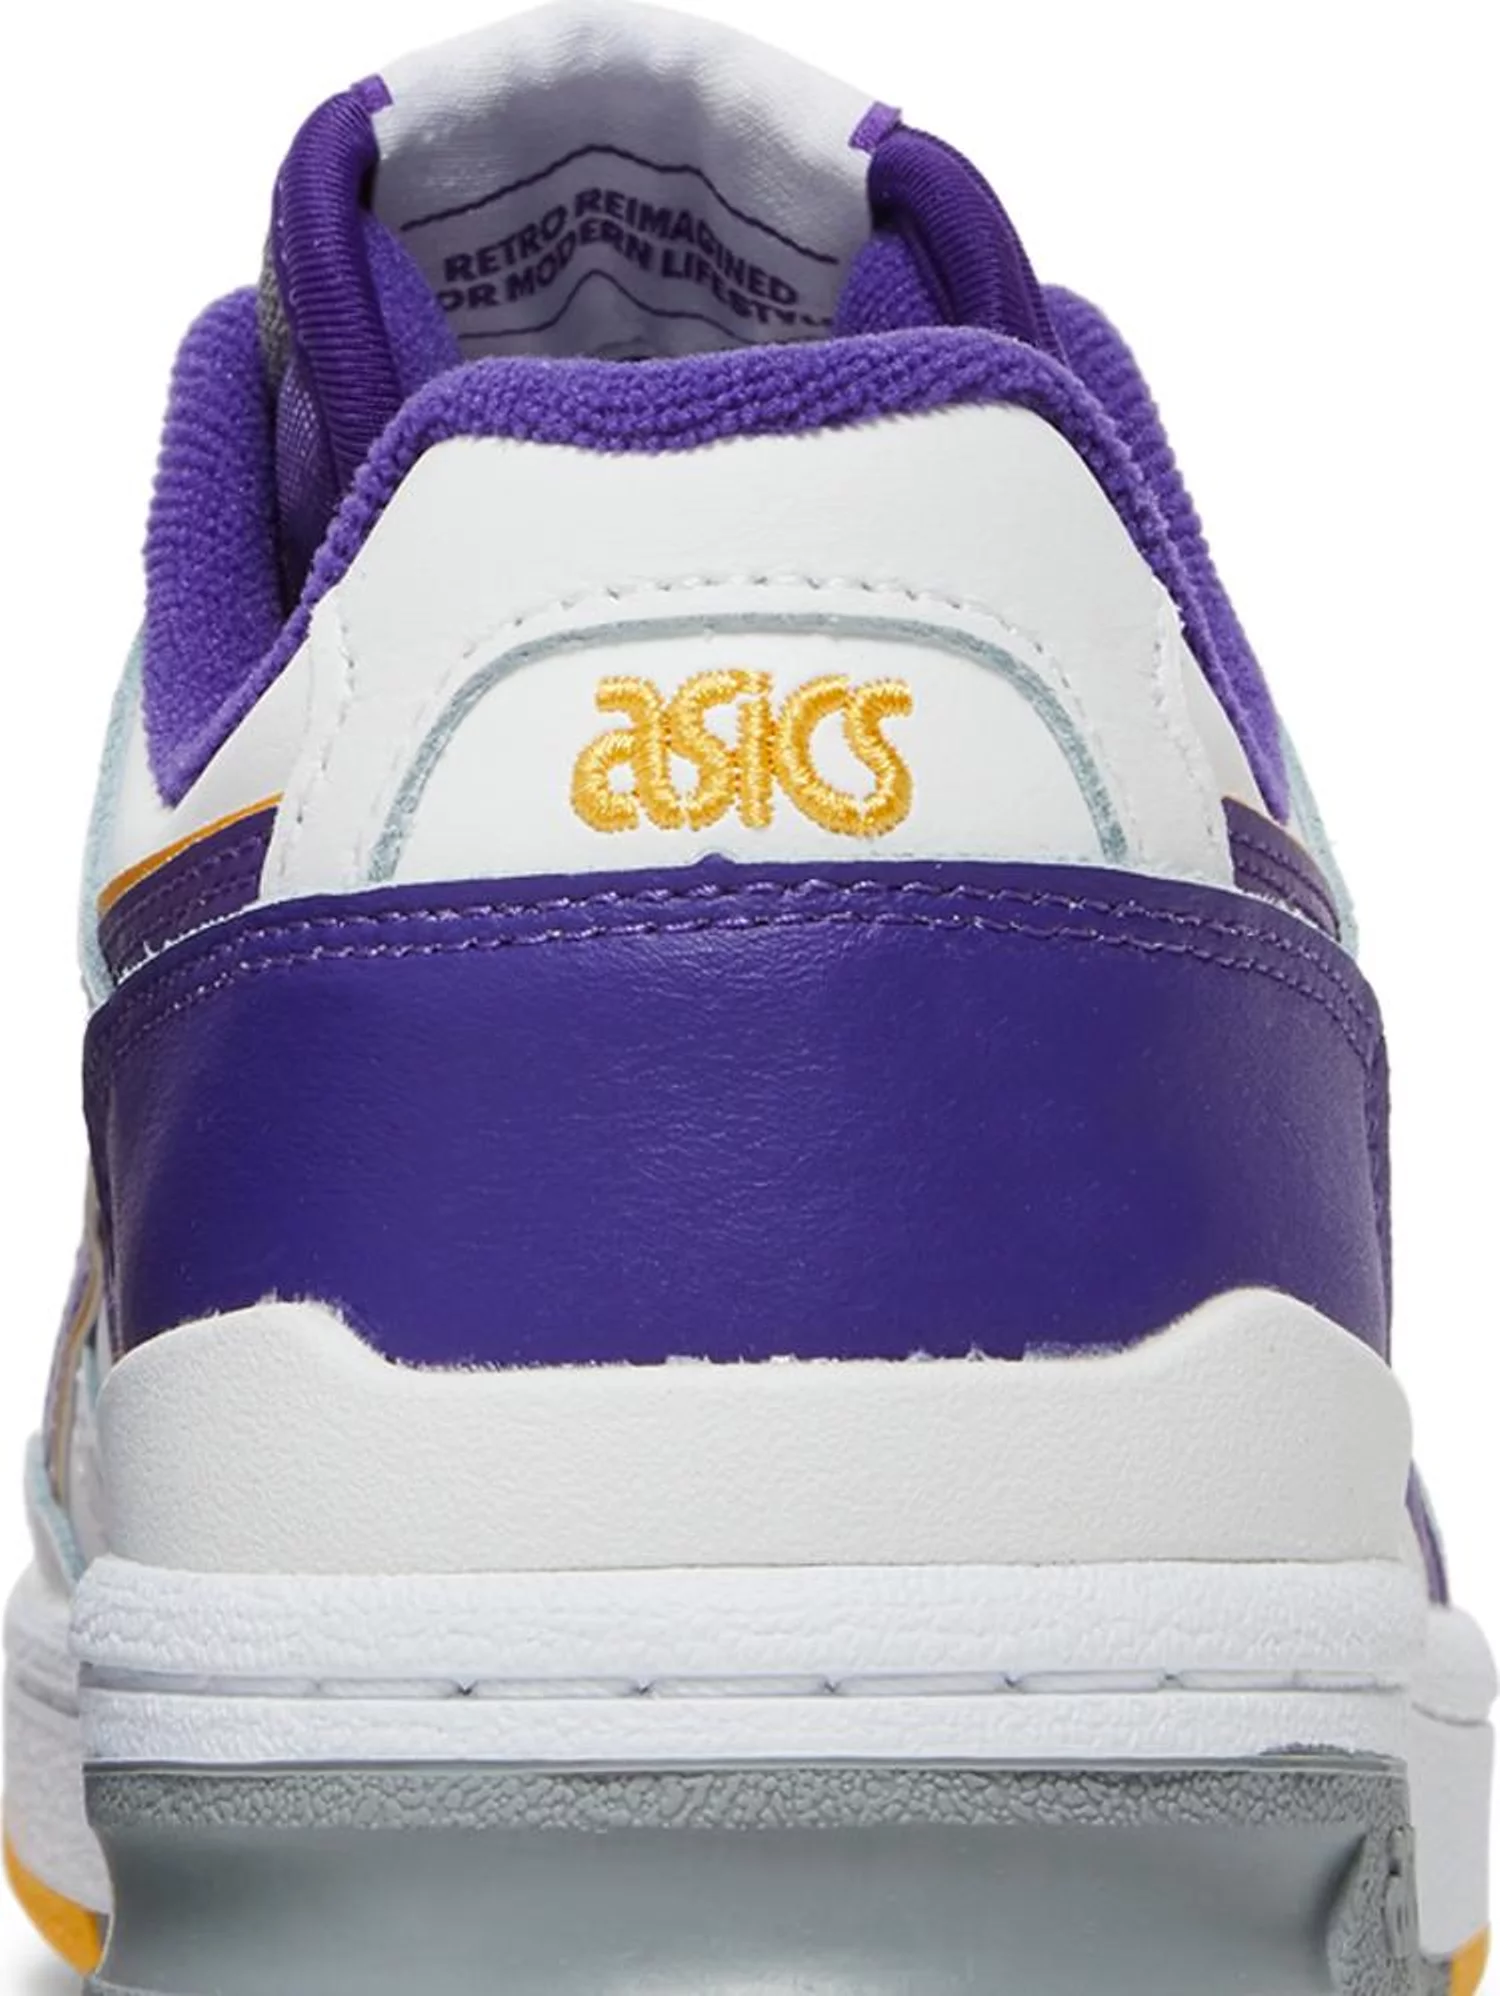 Giày Asics EX89 'Lakers' 1201A476 102